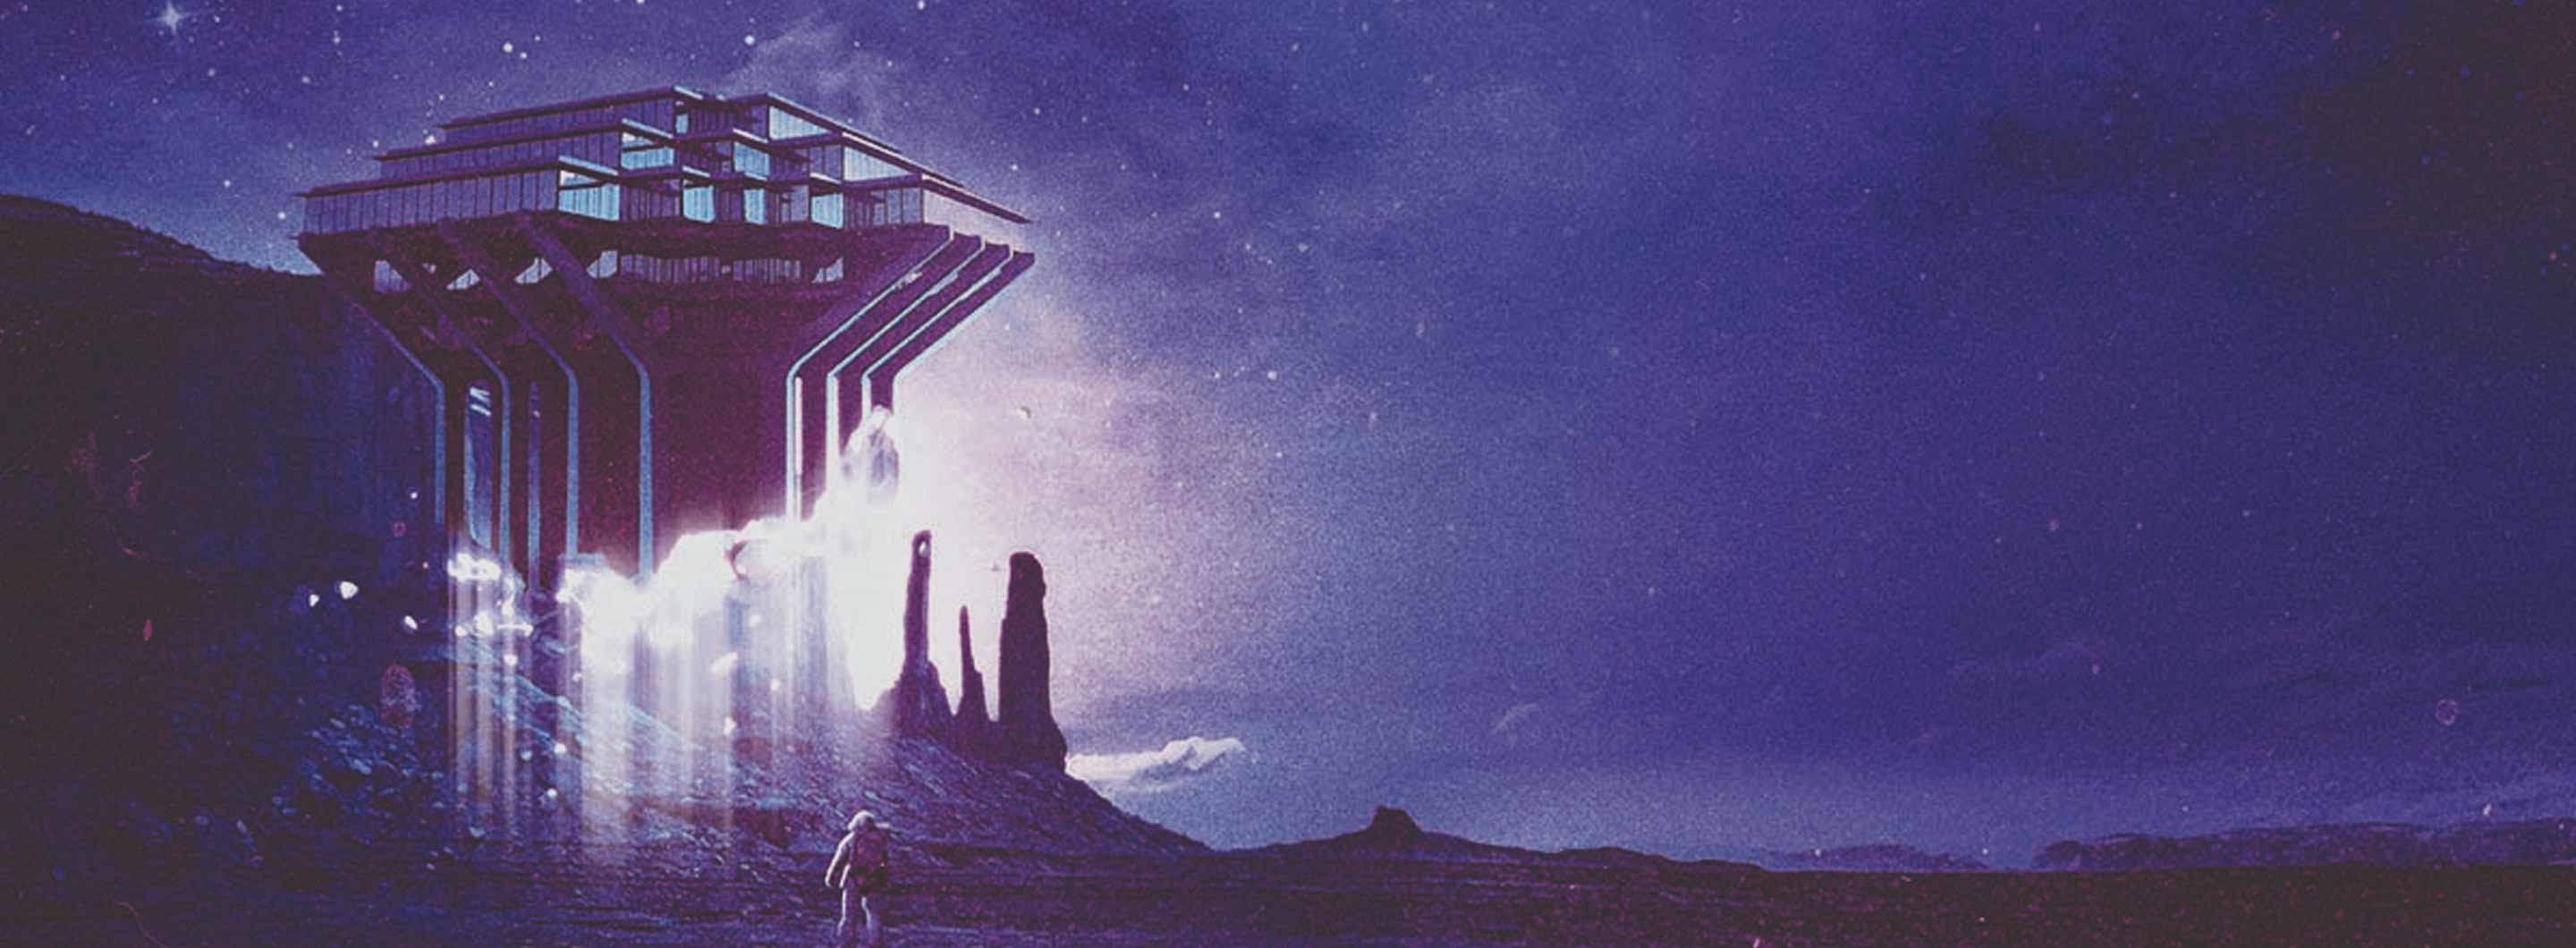 Illustration of Geisel Library as a spaceship floating over an outerworld planet